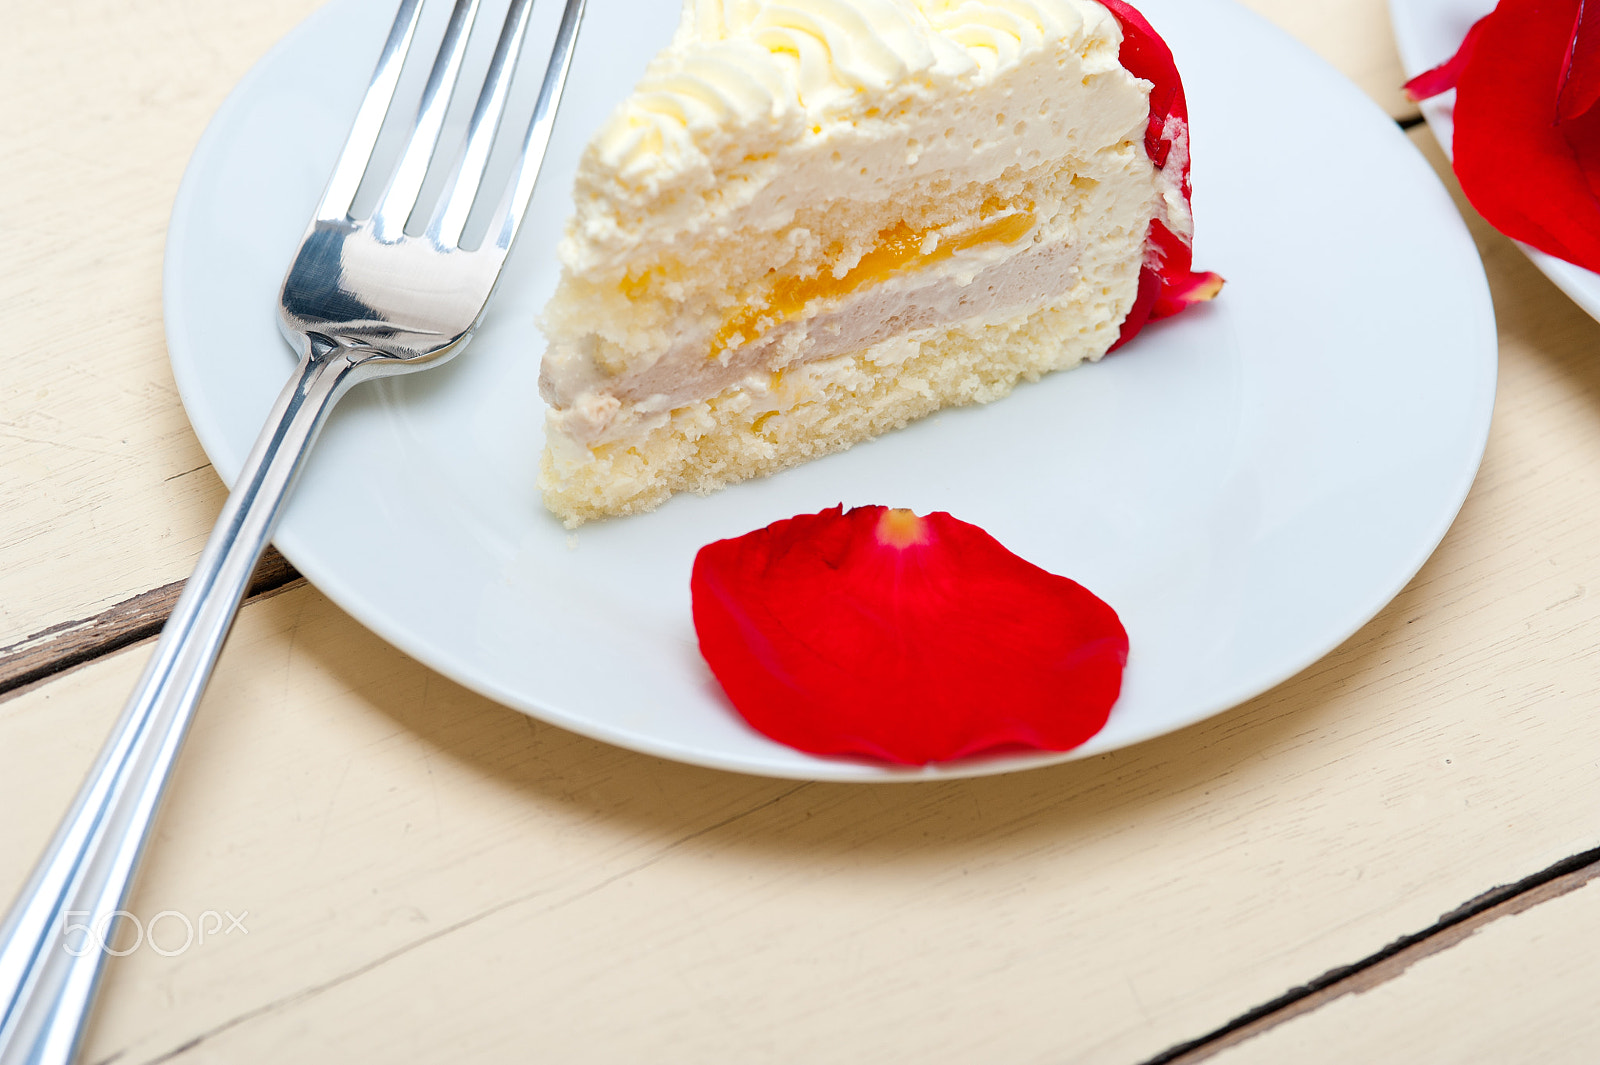 AF Micro-Nikkor 105mm f/2.8 sample photo. Whipped cream mango cake photography